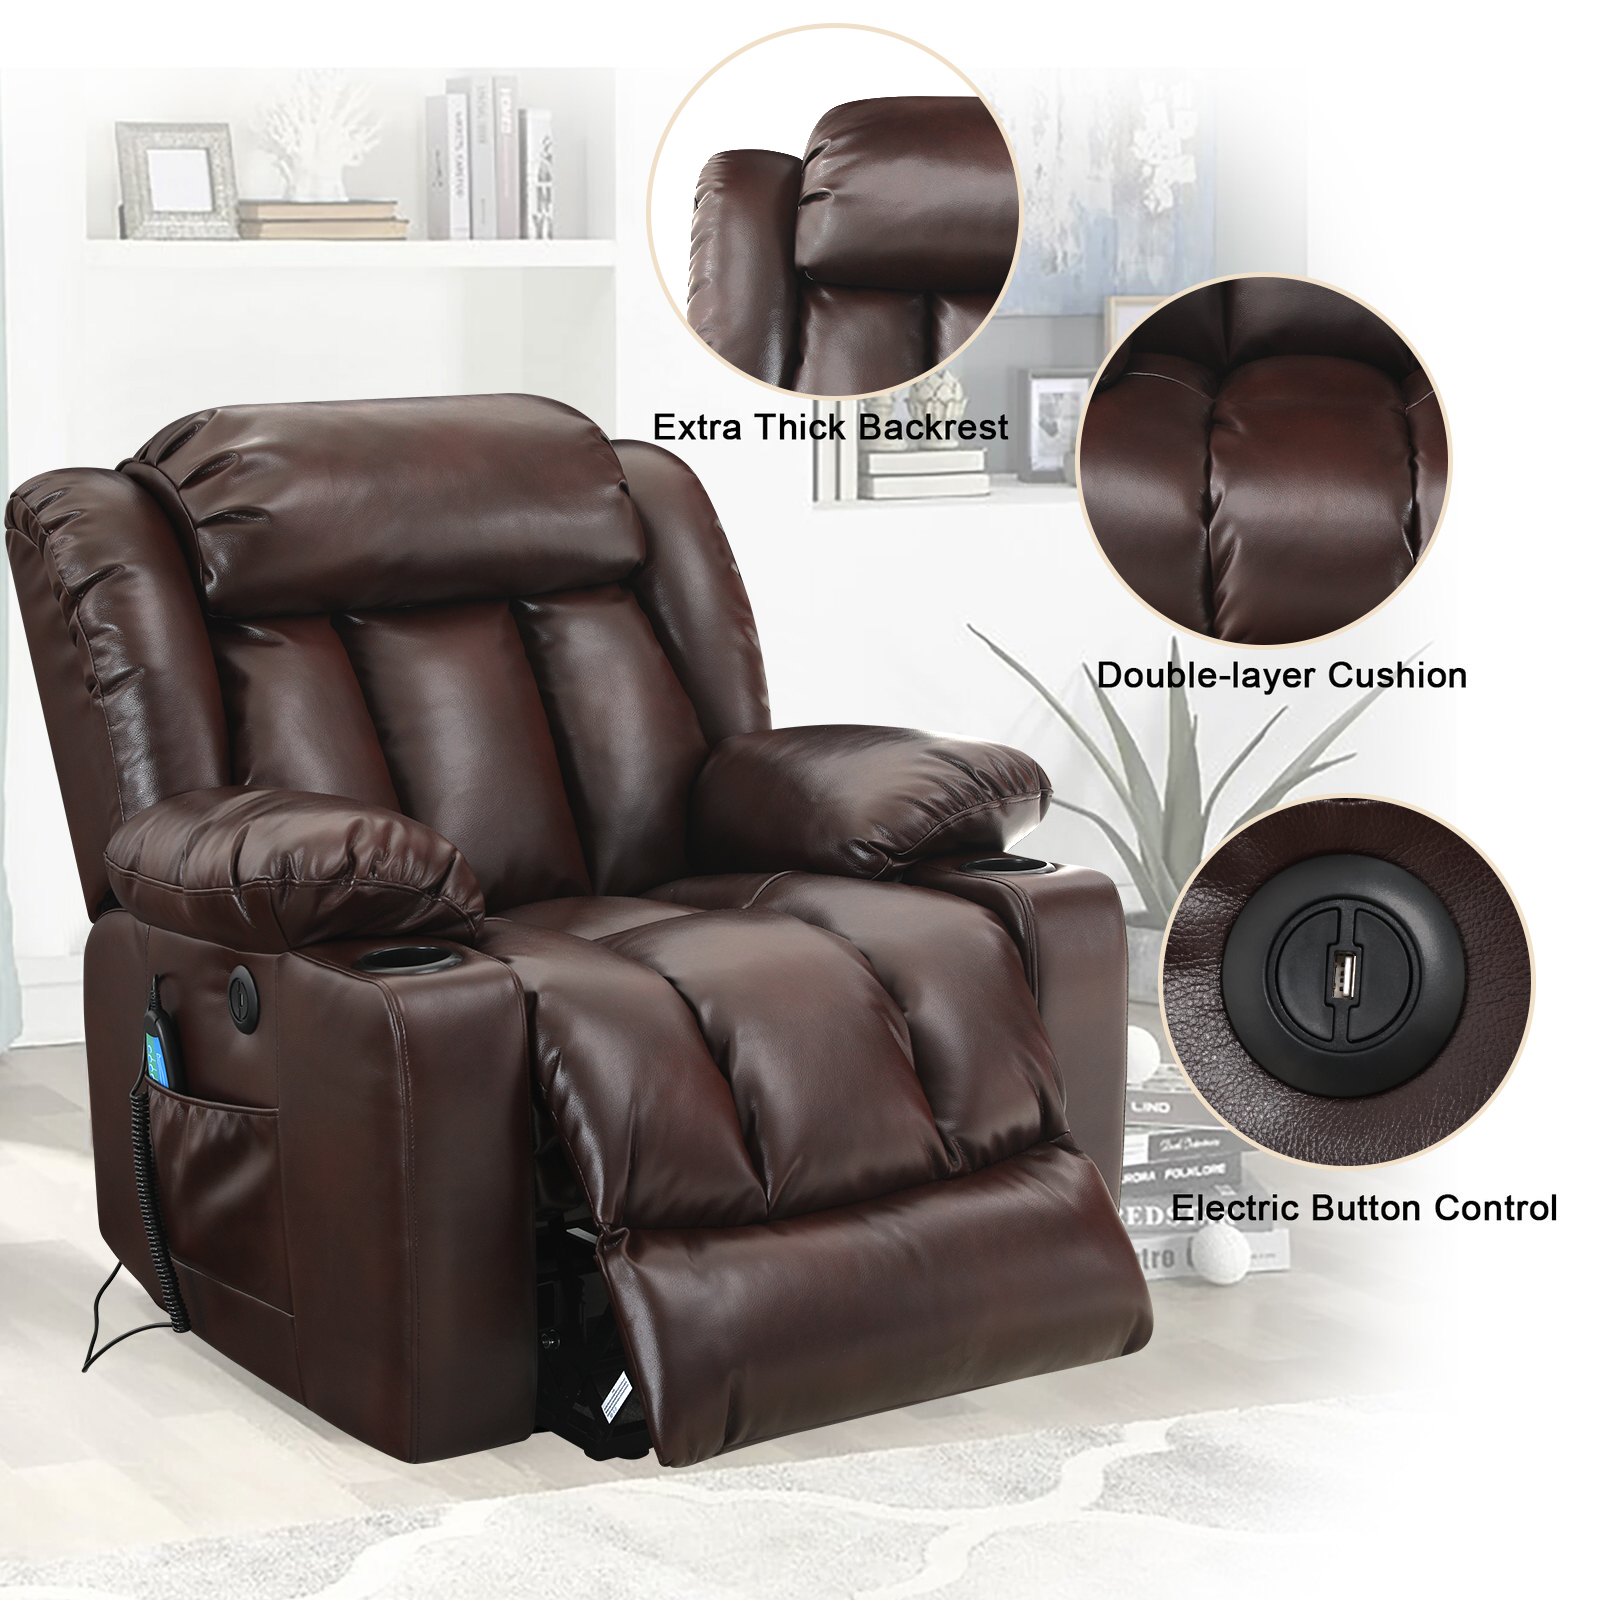 Large Power Lift Recliner Chair for Elderly,Massage Chair Recliner with ...